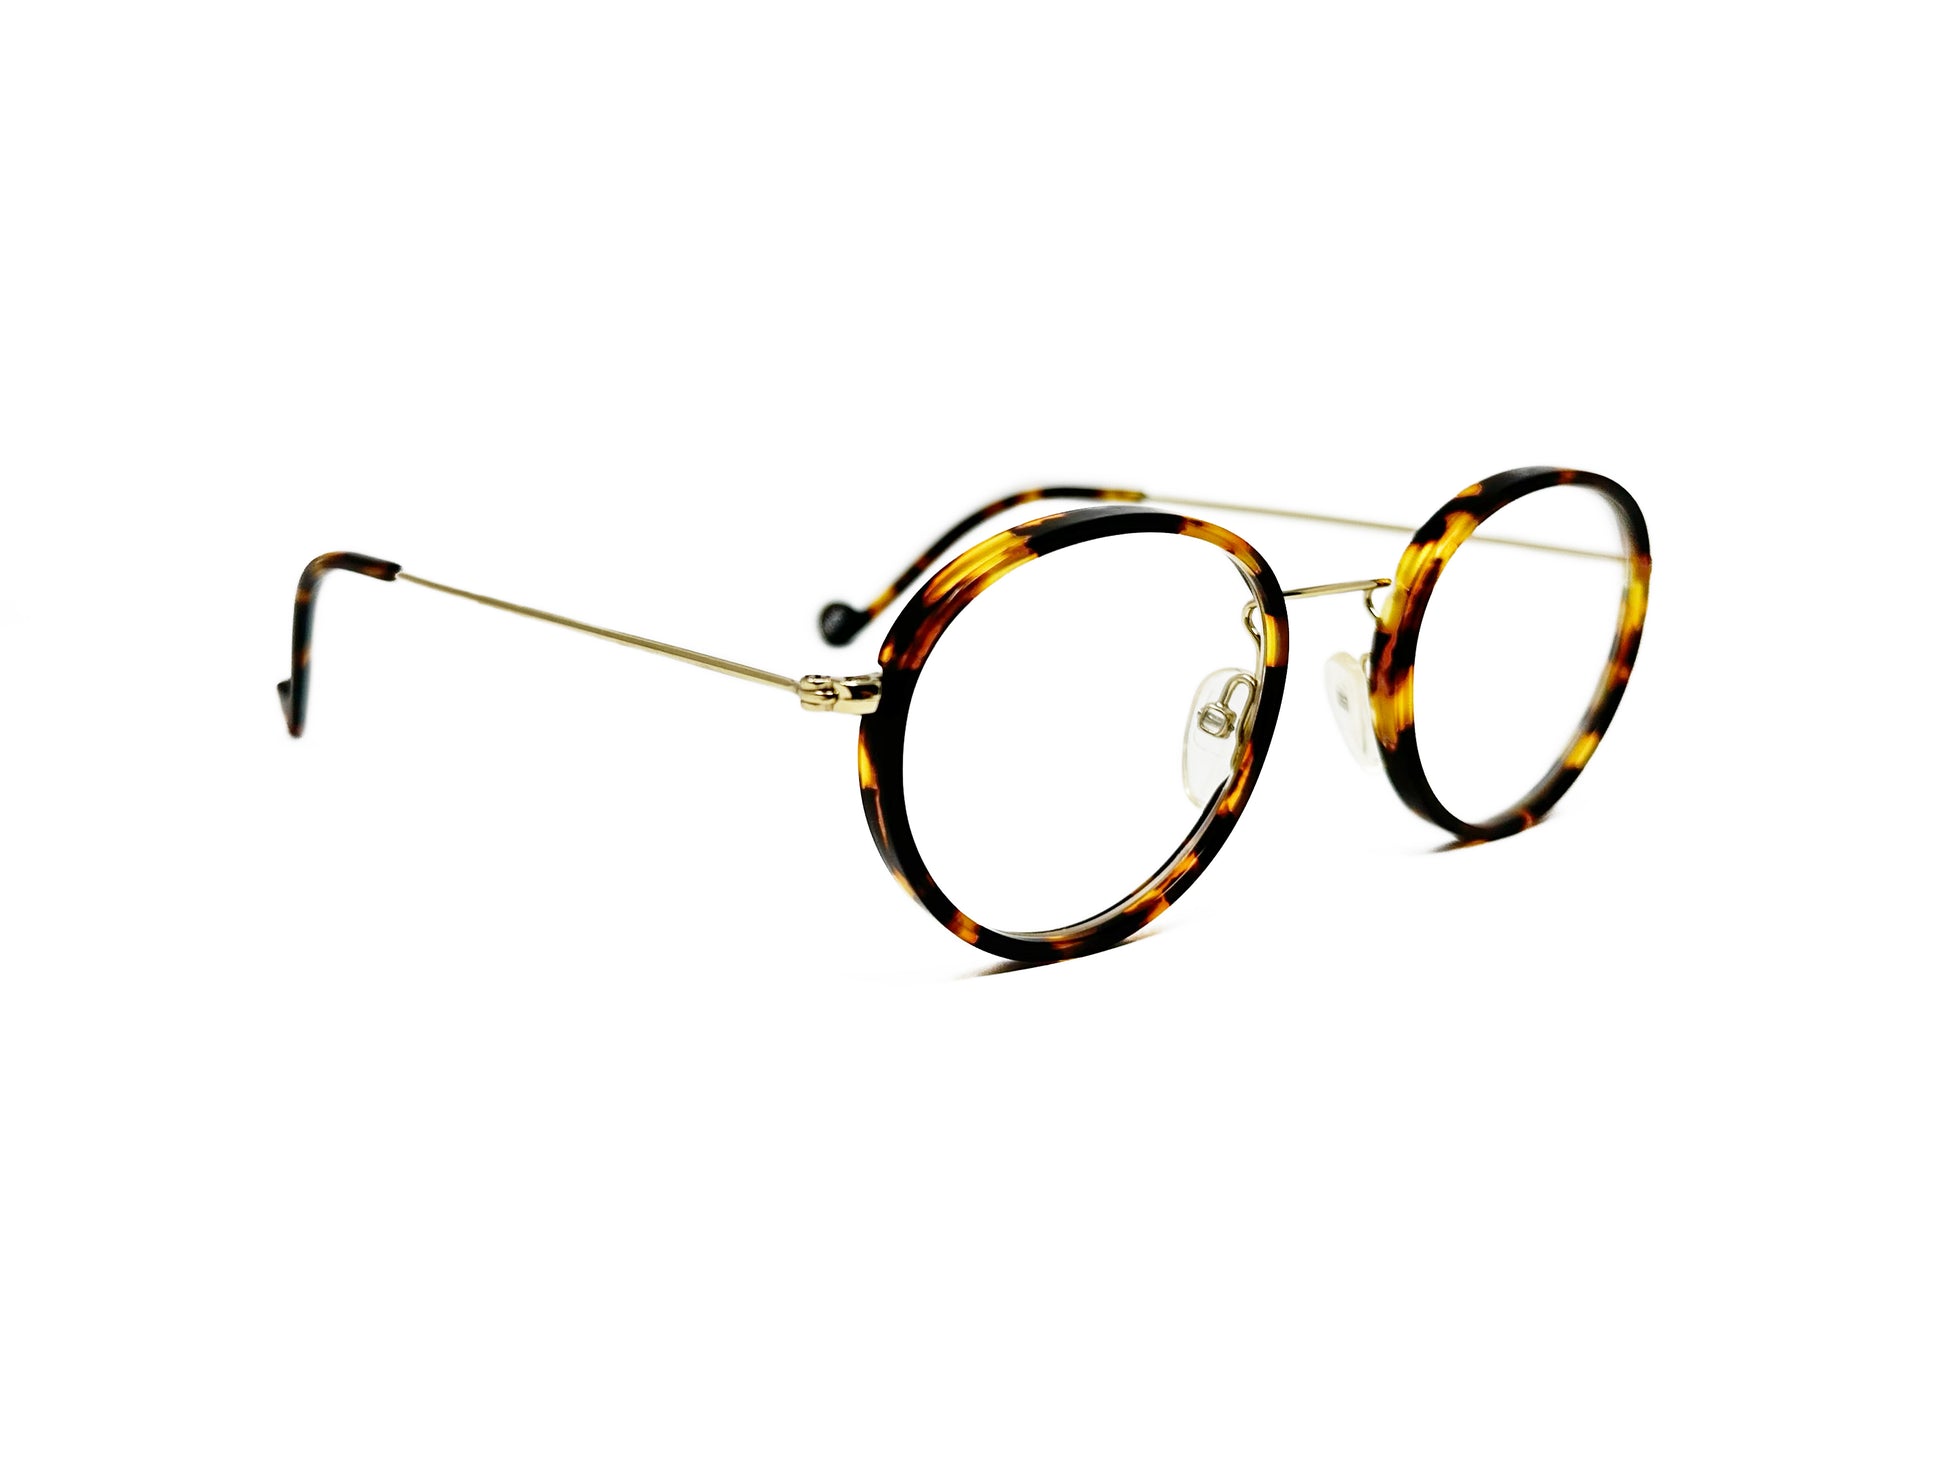 XIT pantos optical frame. Acetate lining on front with metal temples. Model: M151. Color: 133 - Tortoise with gold metal. Side view.